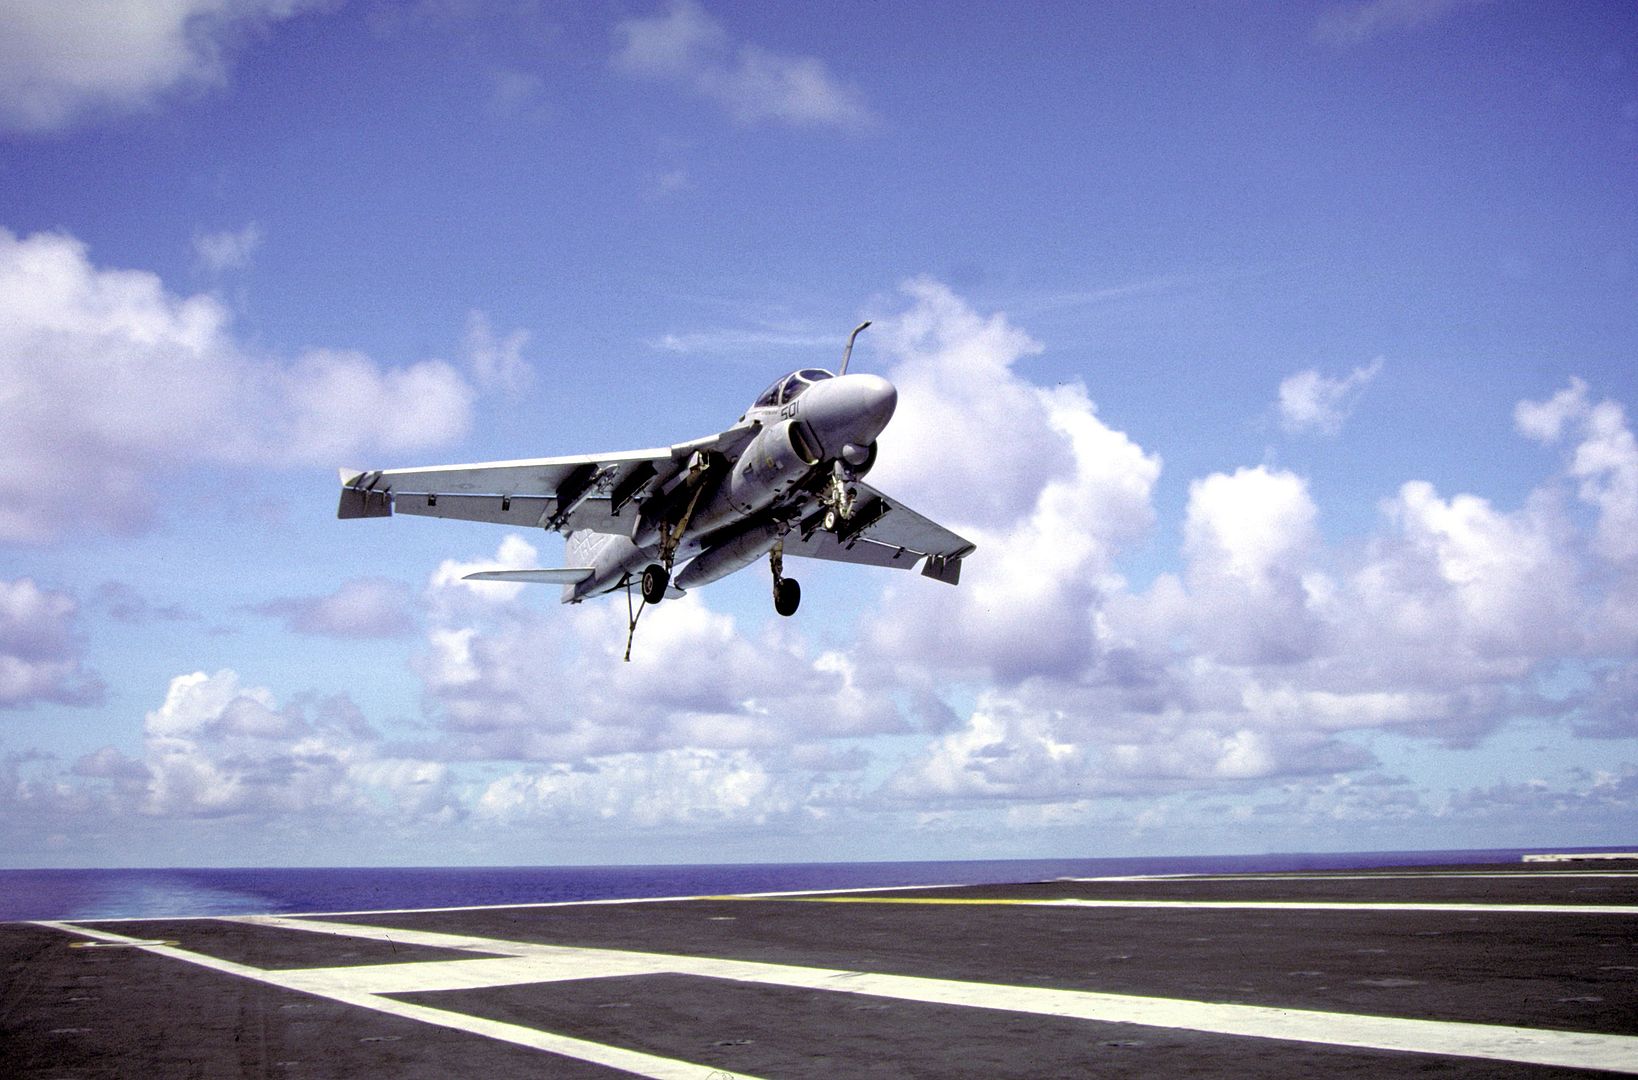 An Attack Squadron 95 A 6E Intruder Aircraft Comes In For A Landing On The Flight Deck Of The Nuclear Powered Aircraft Carrier USS ABRAHAM LINCOLN 2